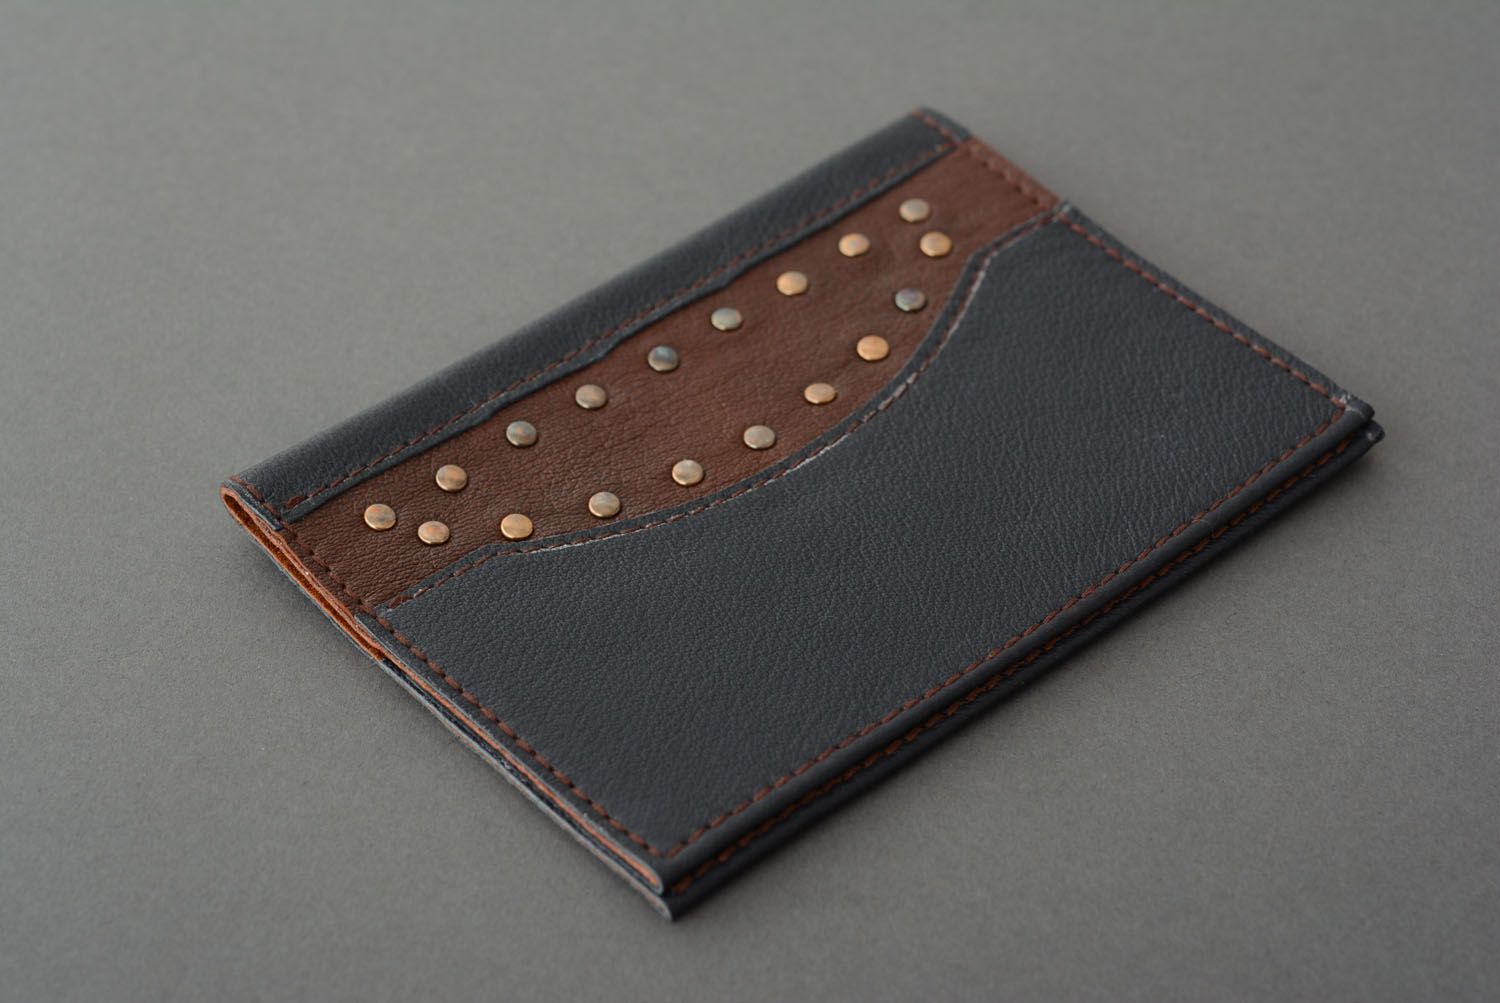 Passport cover made of leather photo 1